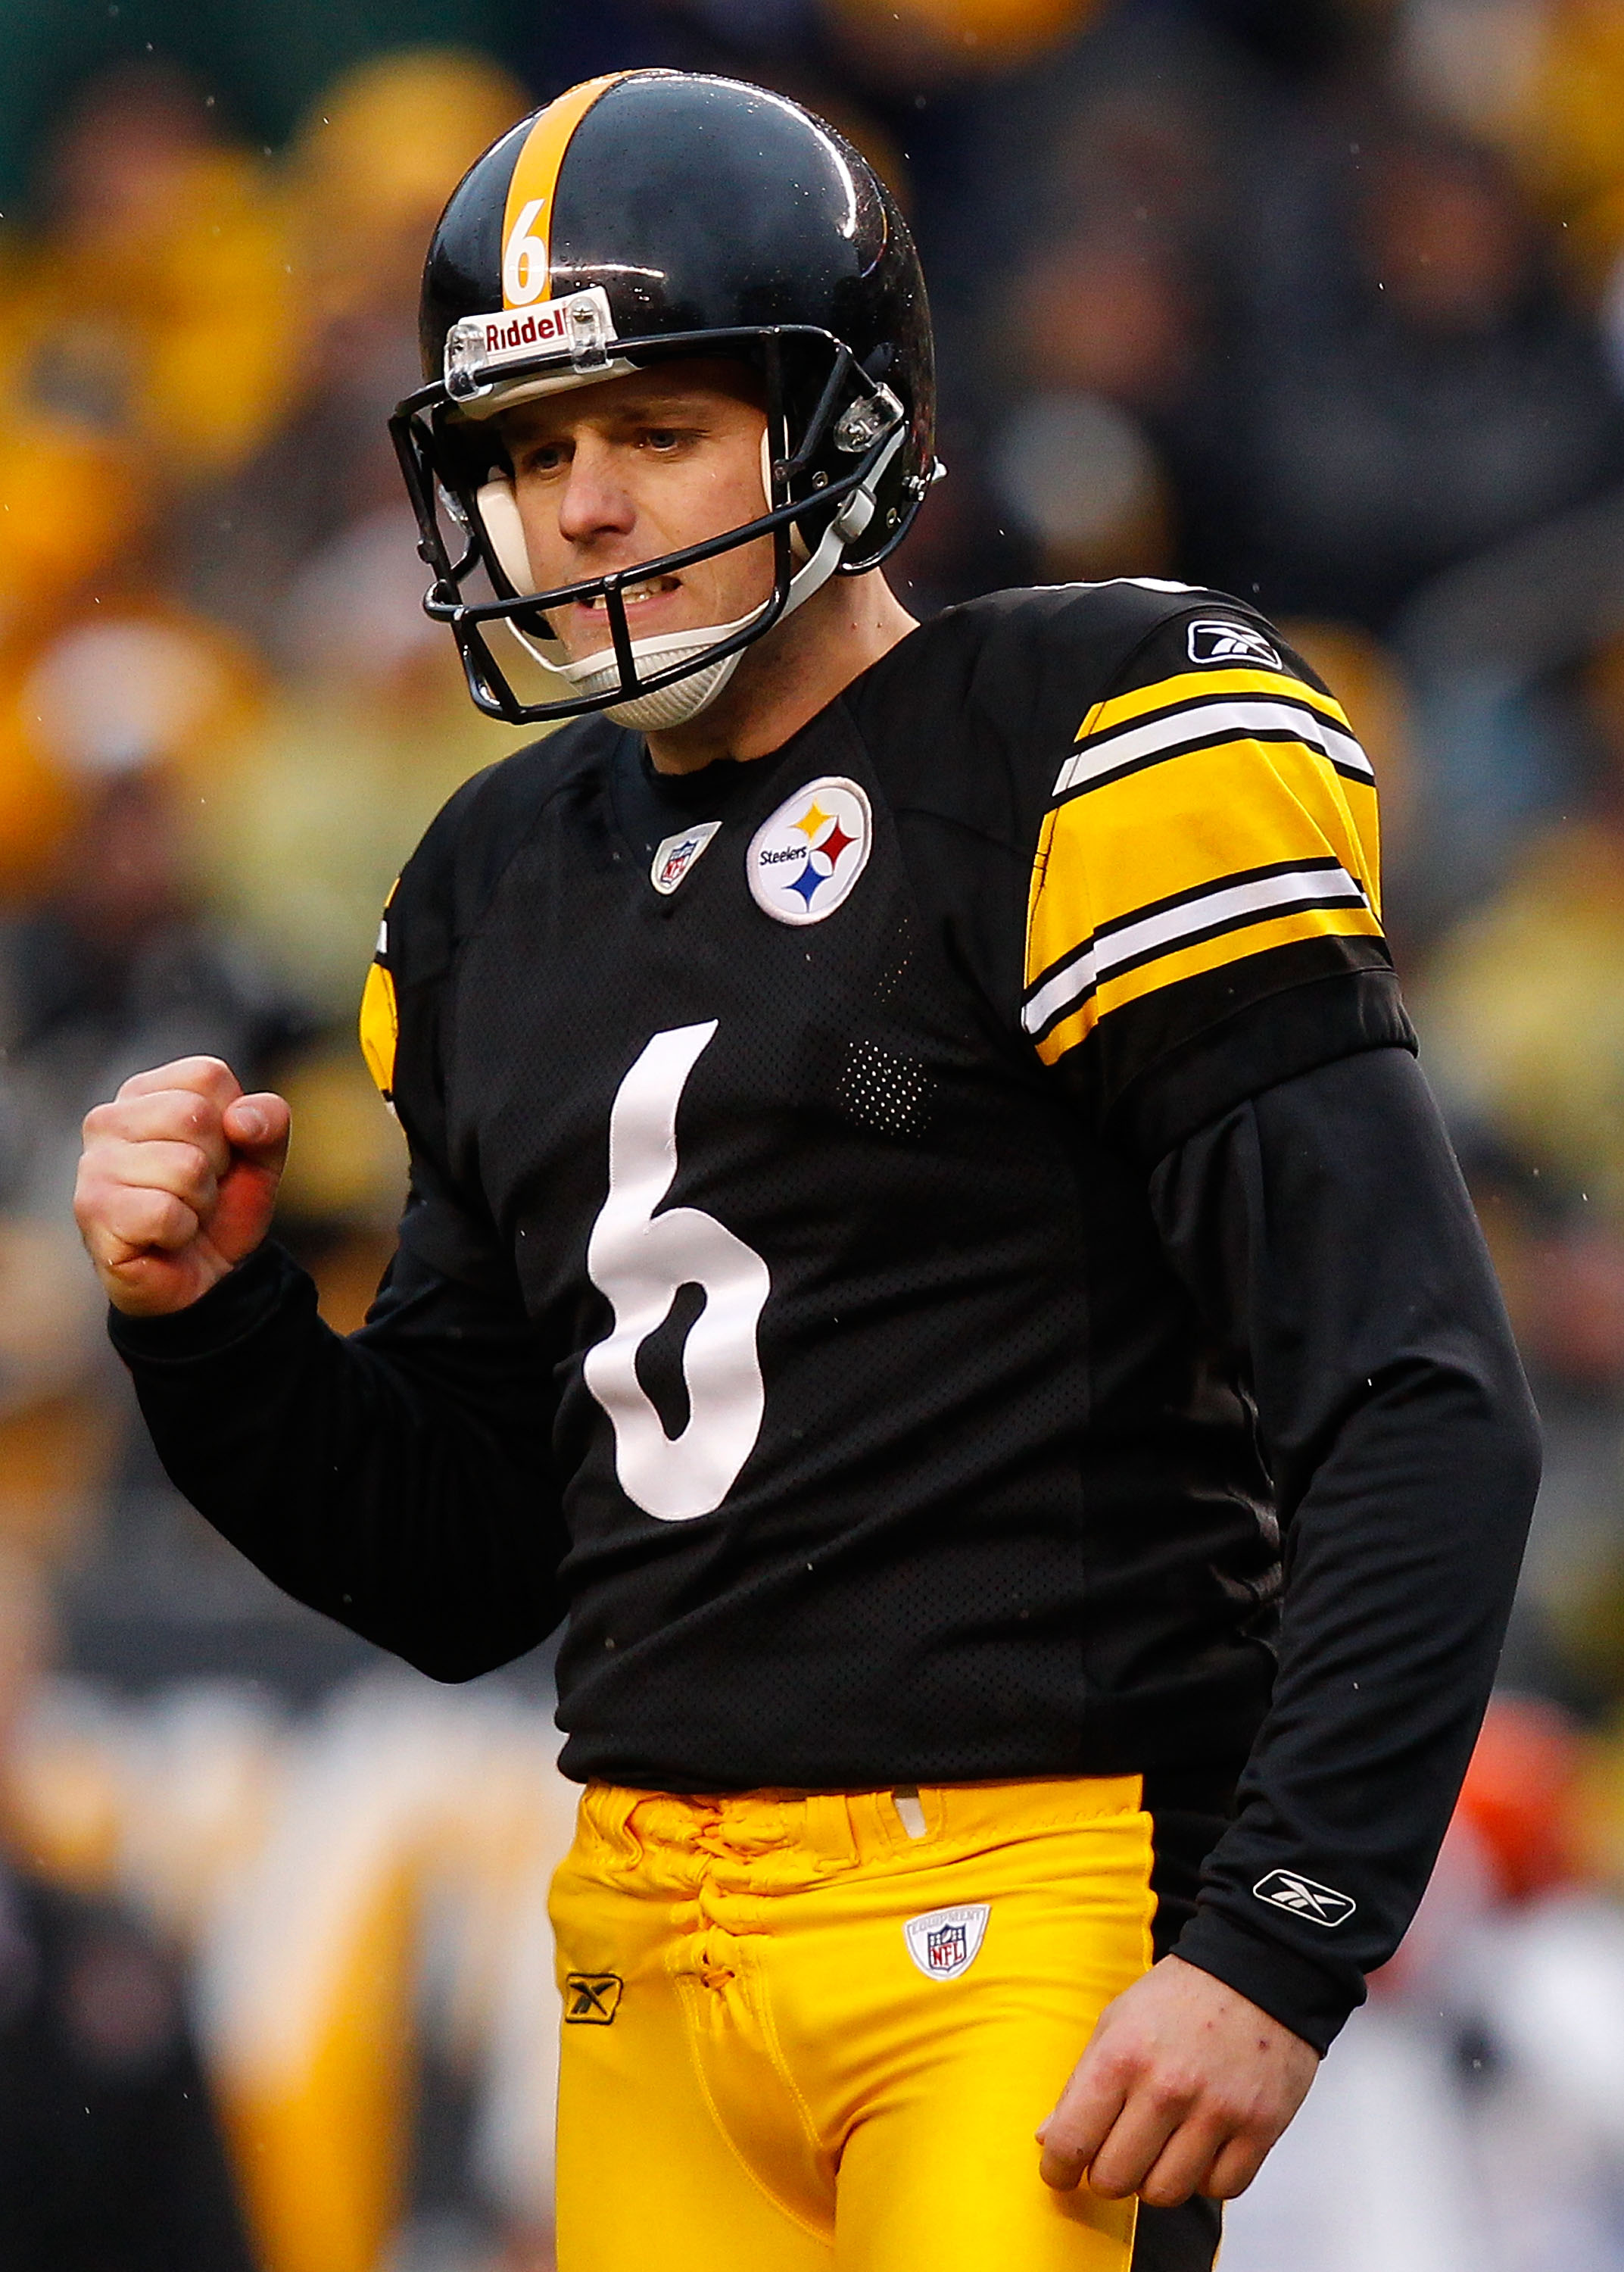 PITTSBURGH - DECEMBER 12:  Shaun Suisham #6 of the Pittsburgh Steelers celebrates after kicking a 41-yard field goal against the Cincinnati Bengals during the game on December 12, 2010 at Heinz Field in Pittsburgh, Pennsylvania.  (Photo by Jared Wickerham